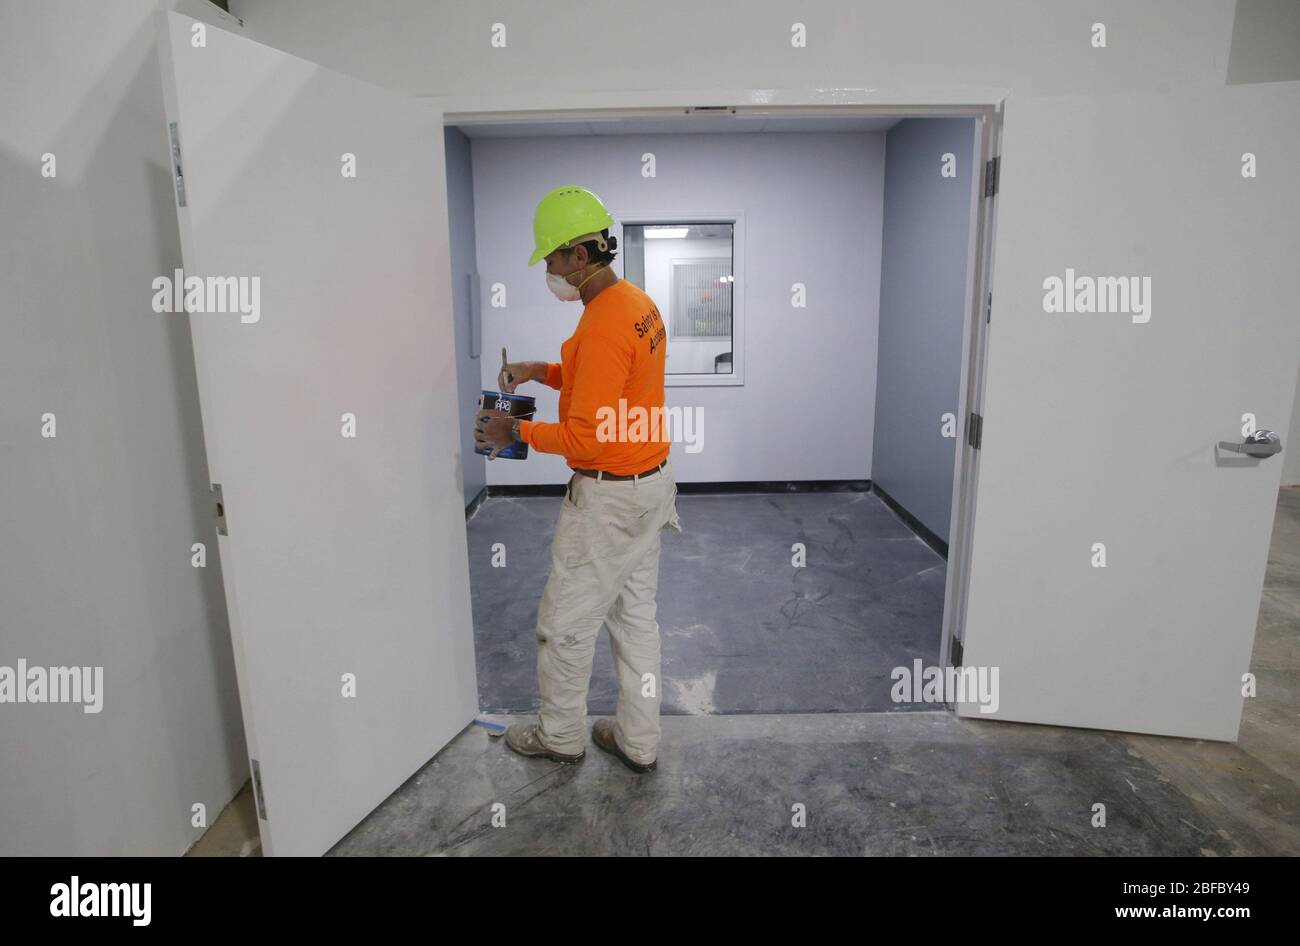 Earth City, Missouri, USA. 17th Apr 2020. A painter puts the finishing touches on trim in a body viewing room in a overflow morgue, in Earth City, Missouri on Friday, April 17, 2020. The Dignified Transfer Center, built in just ten days, is a 29,000 square-foot facility that was built out of preparedness that will provide relief to hospitals, morgues and funeral homes.   Louis County to natural causes, medical events Credit: UPI/Alamy Live News Stock Photo